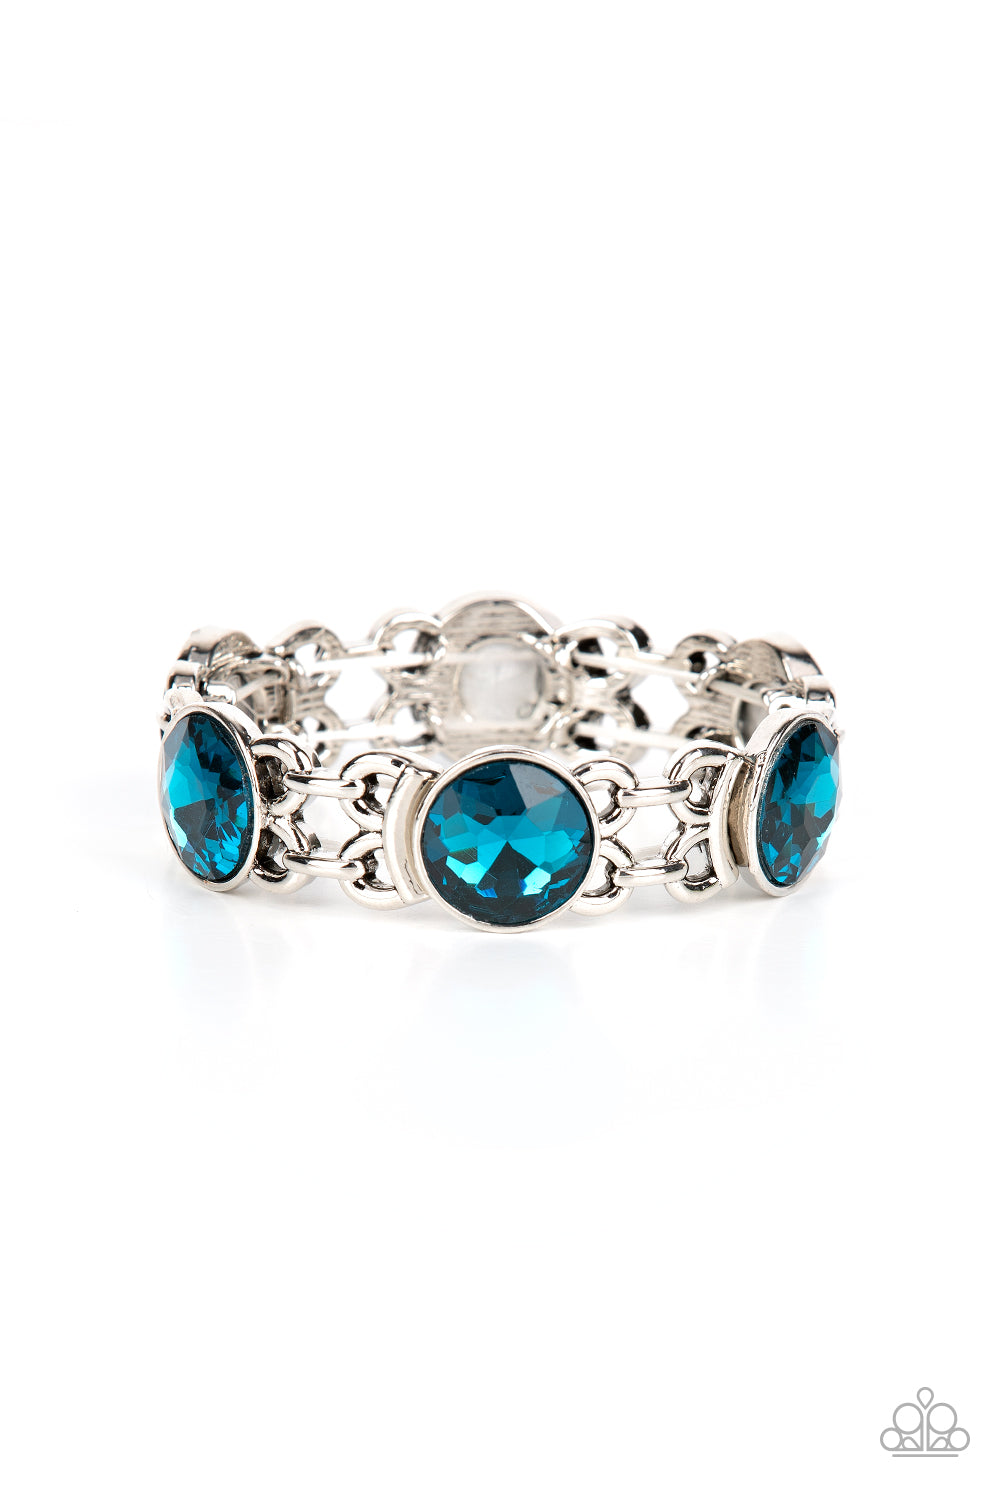 ​Devoted to Drama - Blue and Silver Stretchy Bracelet - Paparazzi Accessories - 
Featuring edgy chain-like fittings, a sparkly series of oversized blue rhinestones are threaded along stretchy bands around the wrist for a dramatic pop of glitz.
Sold as one individual bracelet.
